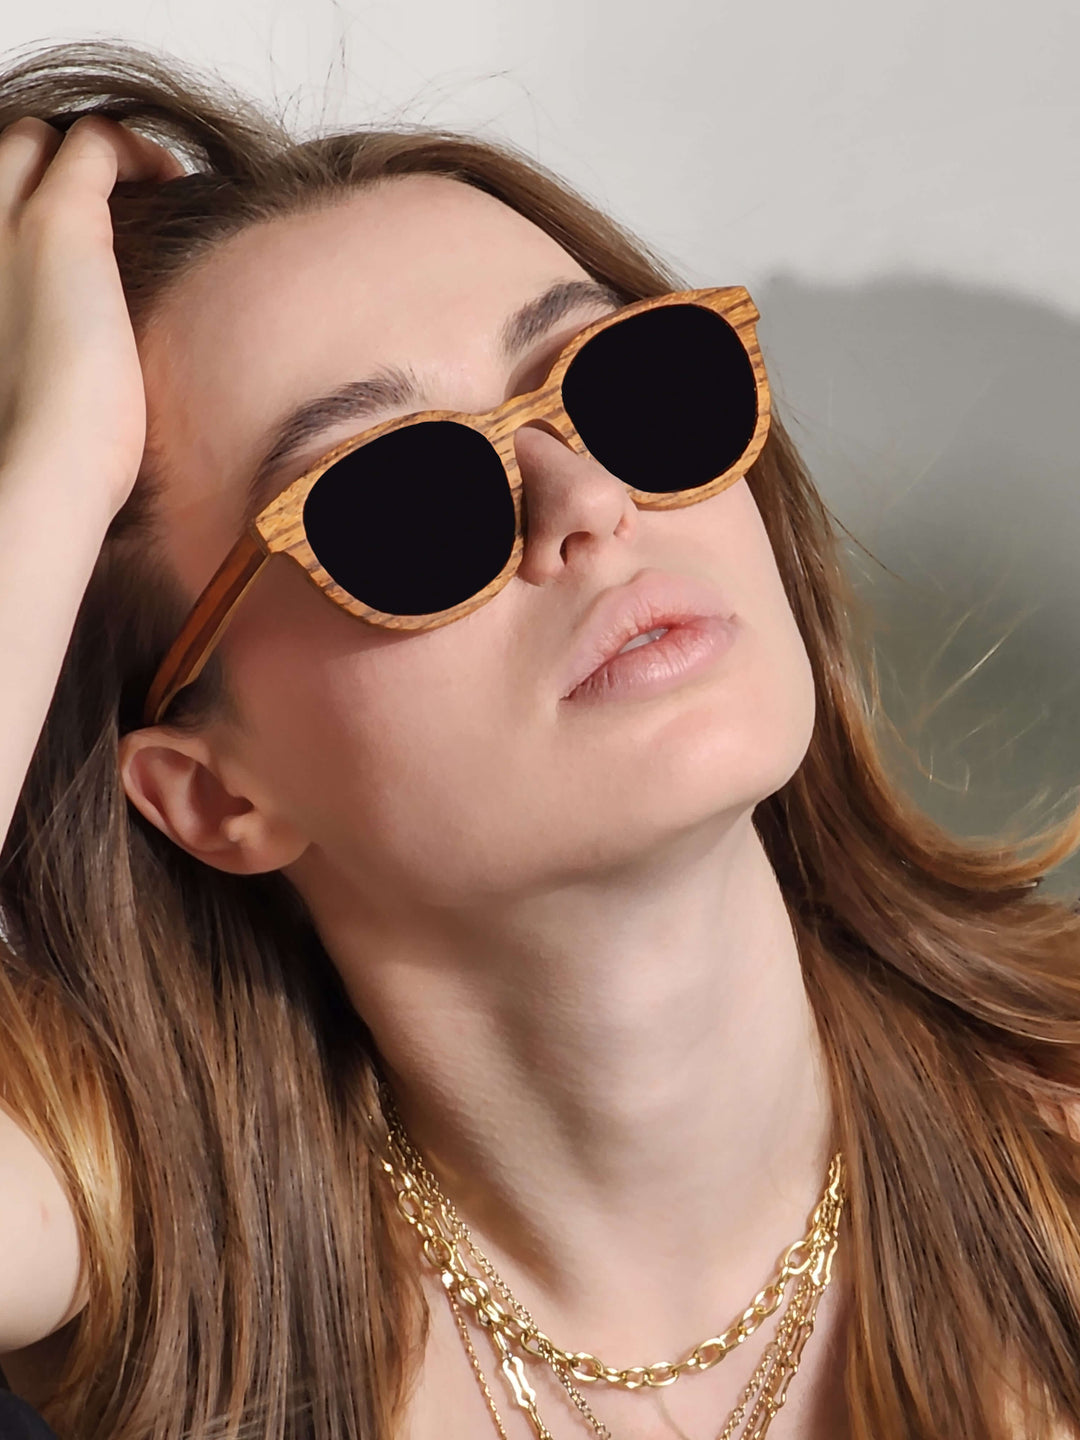  A stylish woman wearing Zebrawood wooden sunglasses with a gold chain around her neck.